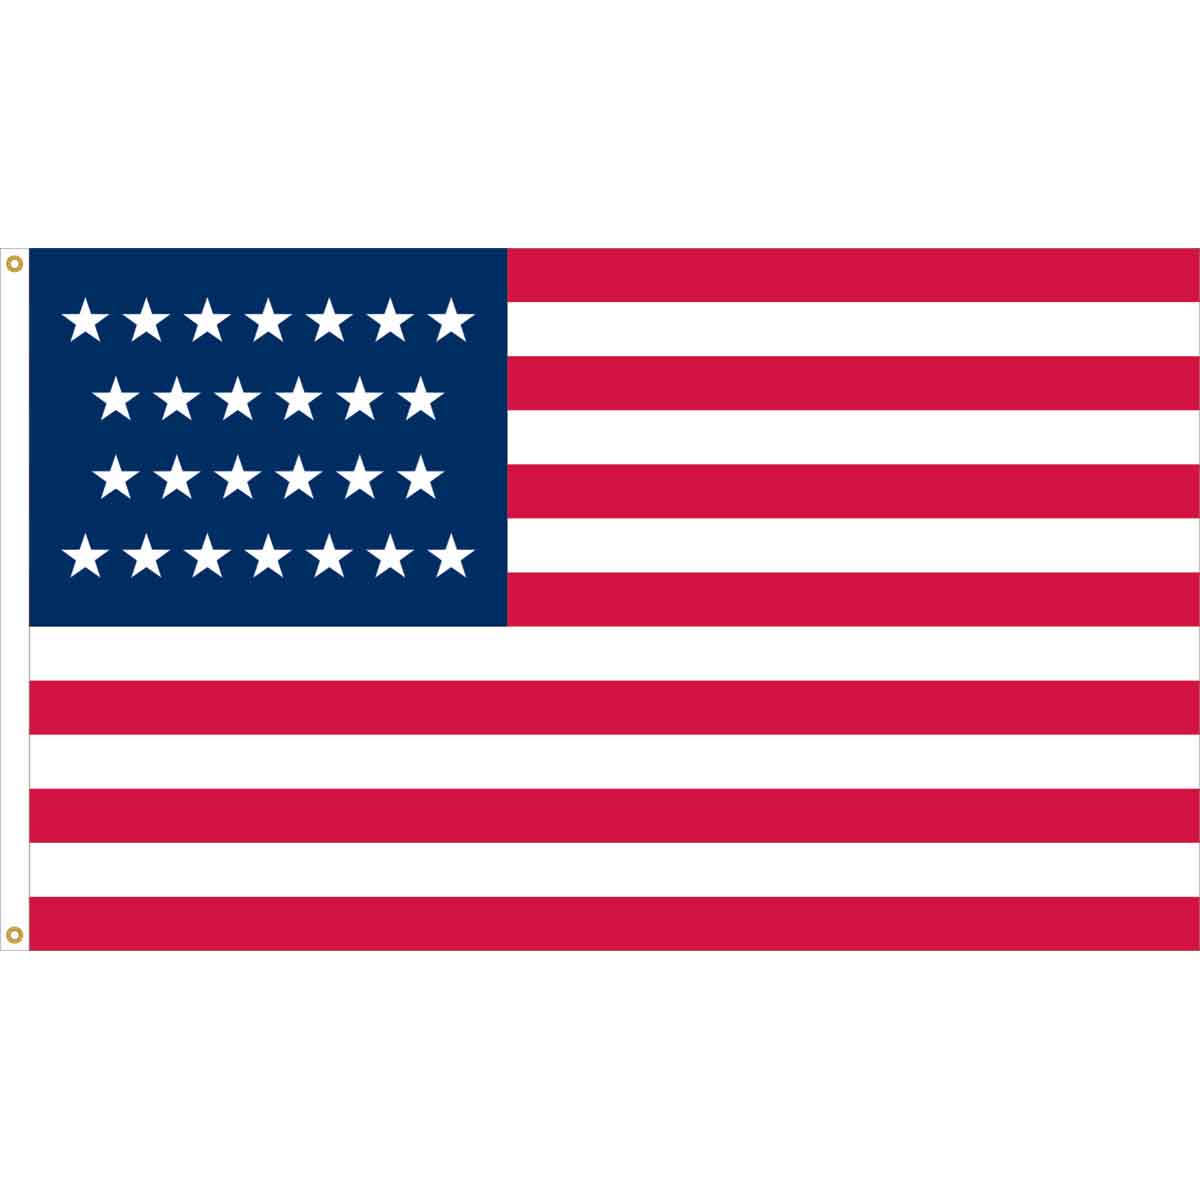 Evolution of Old Glory Flags -26 Stars